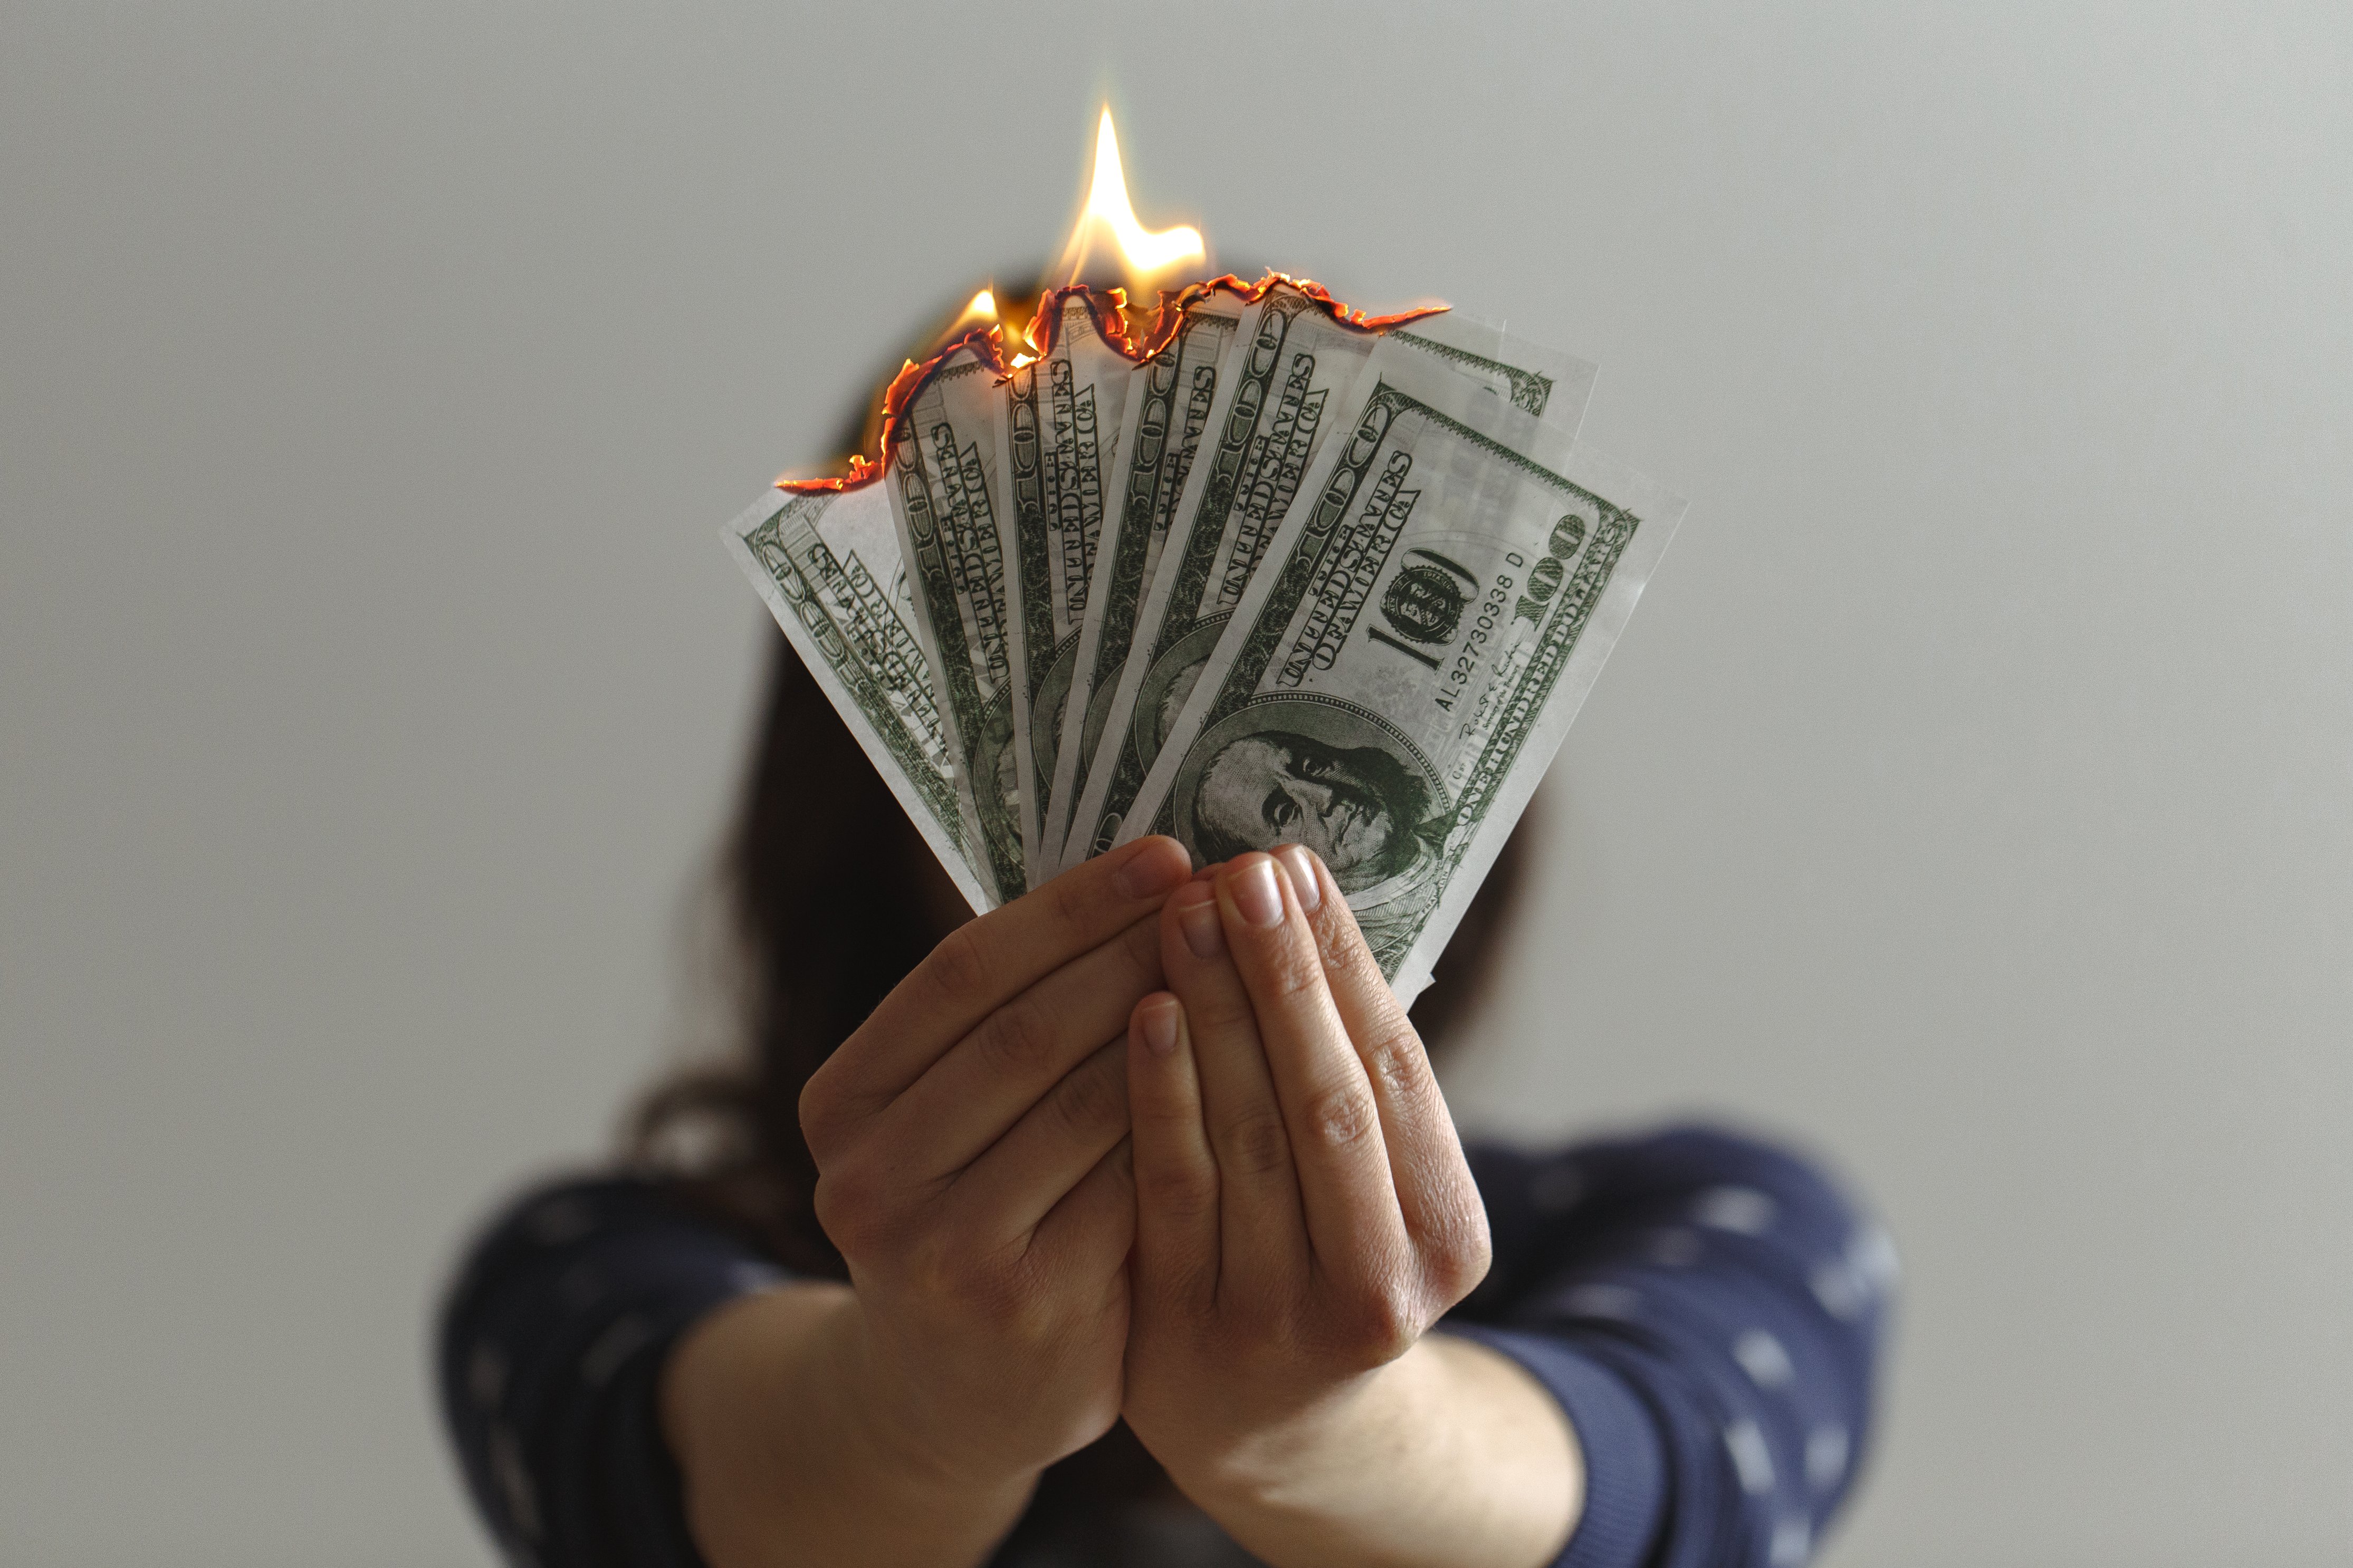 benefits of estate planning - person holding burning currency bills in a fan-like arrangement